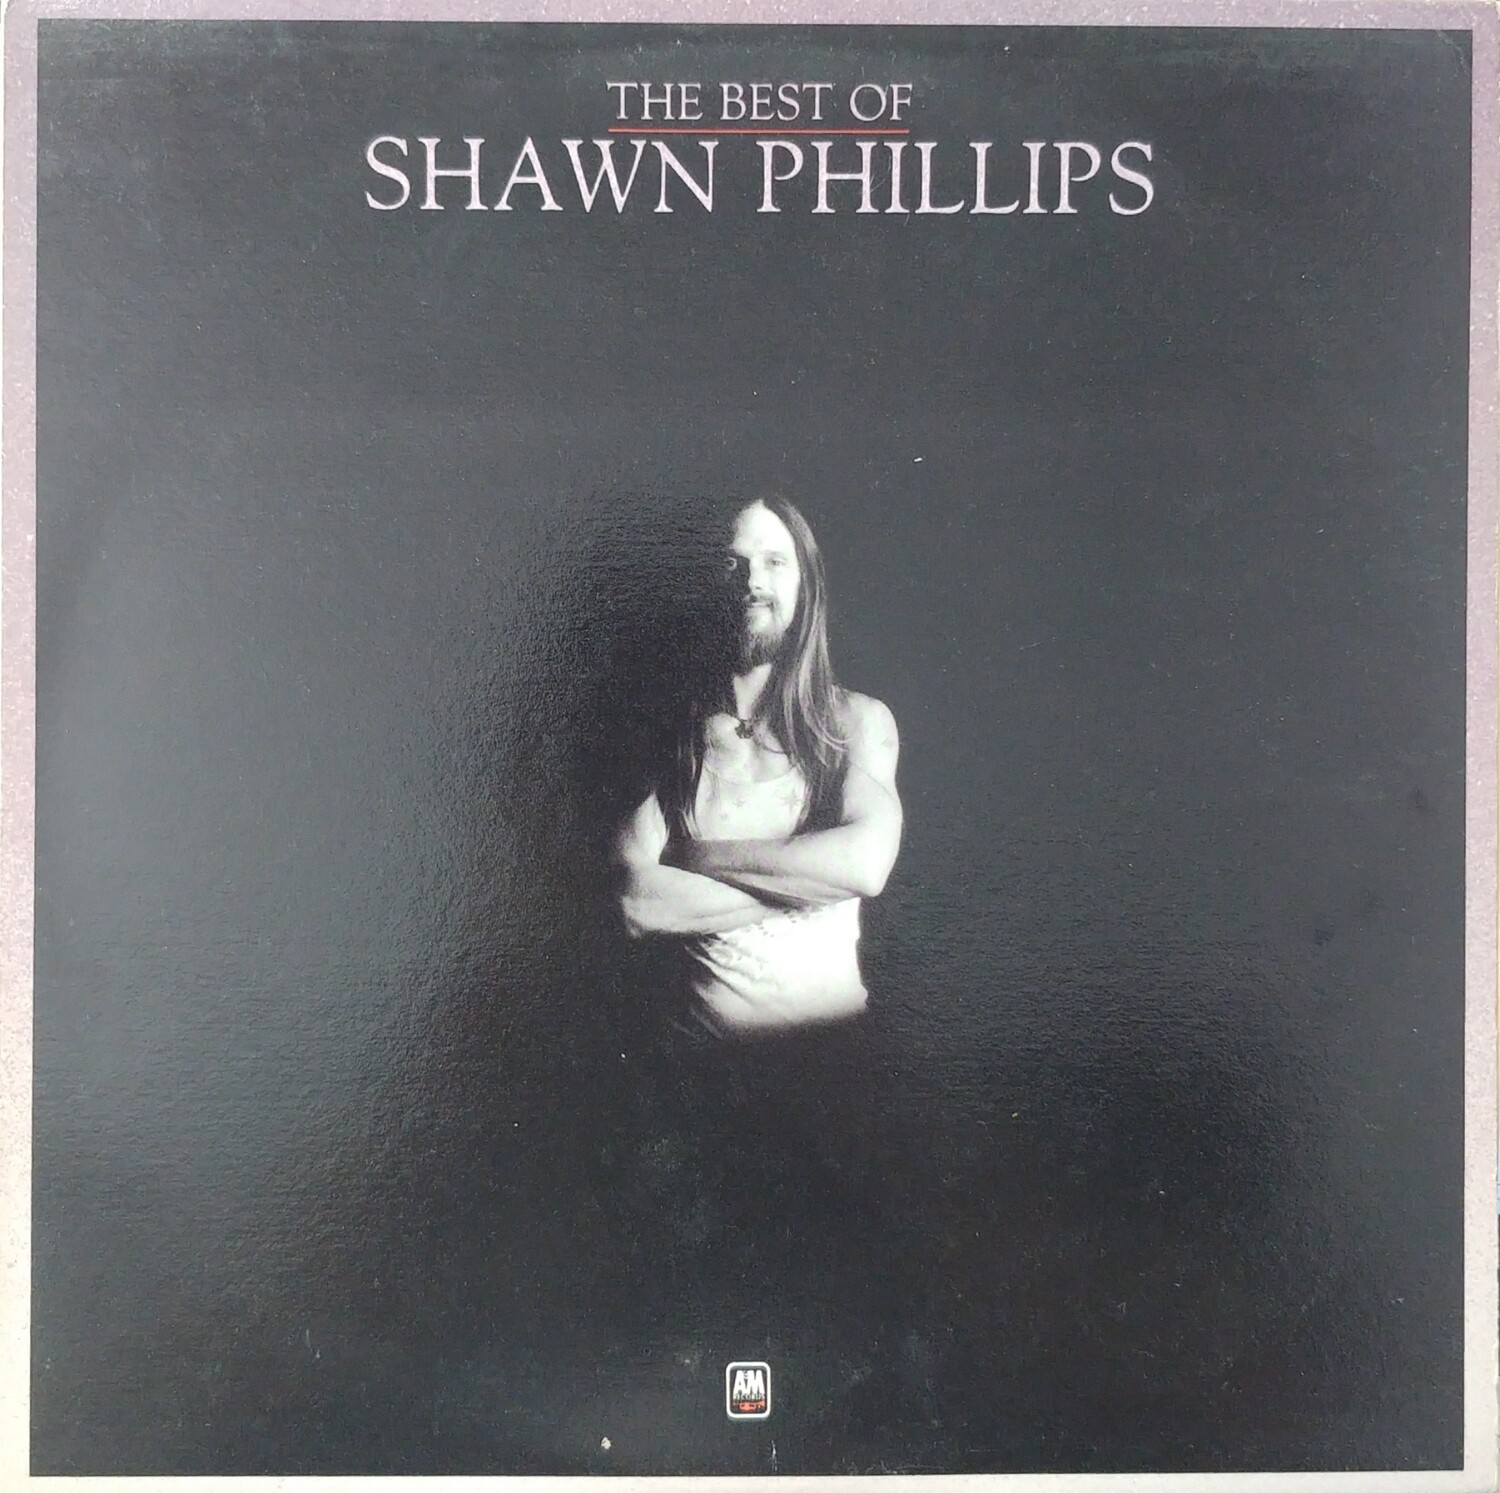 Shawn Phillips - The Best of Shawn Phillips